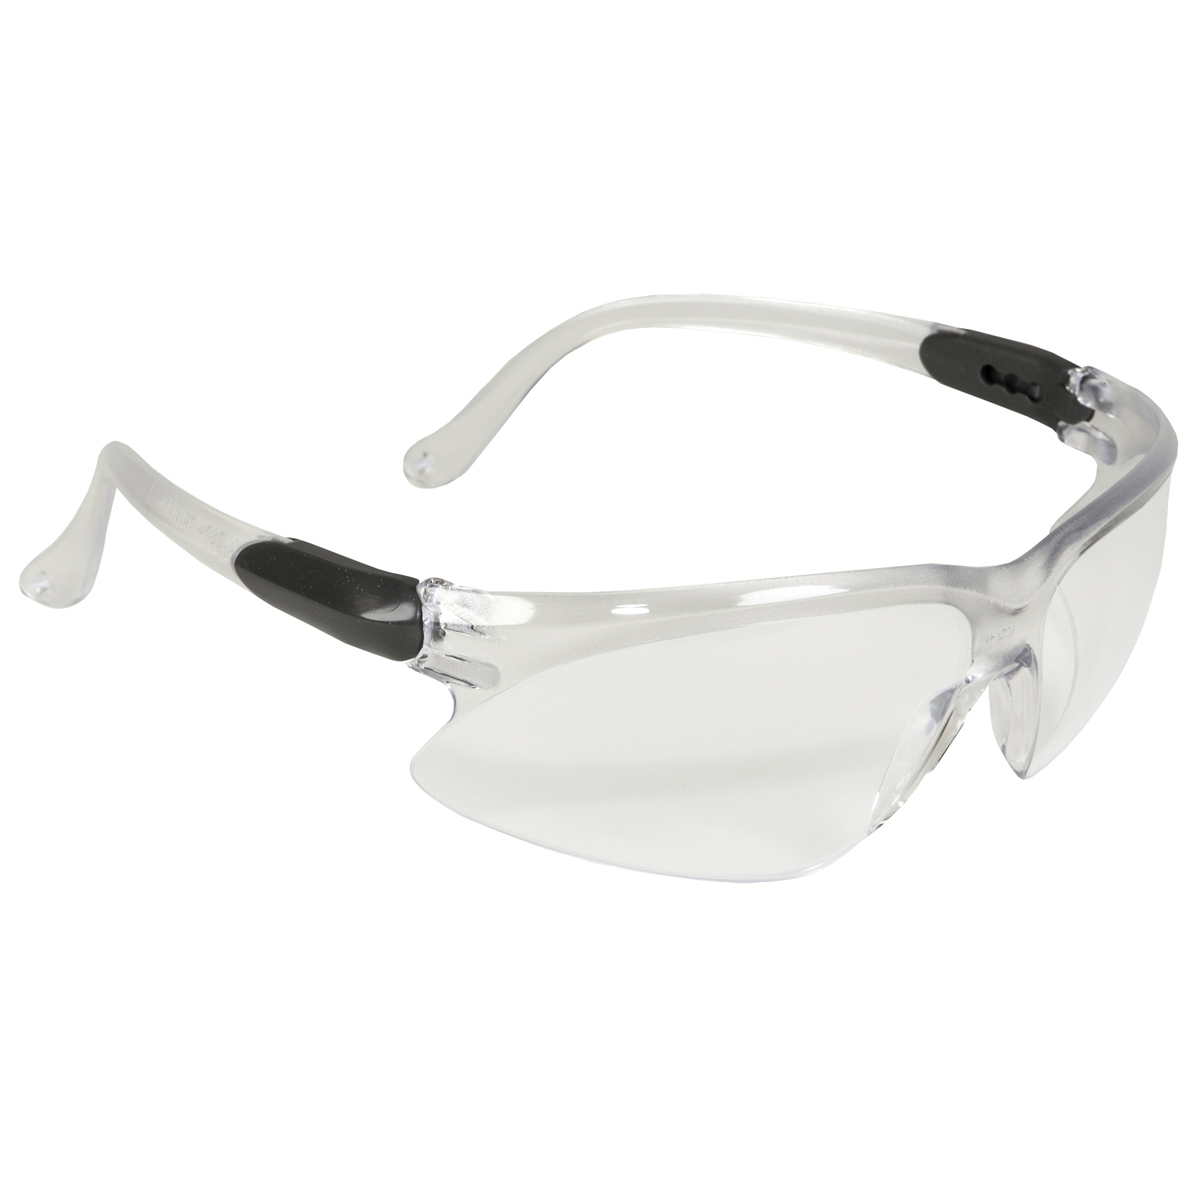 Kimberly-Clark Professional* KleenGuard™ Visio* Silver Safety Glasses With Clear Anti-Fog/Hard Coat Lens (Availability restricti